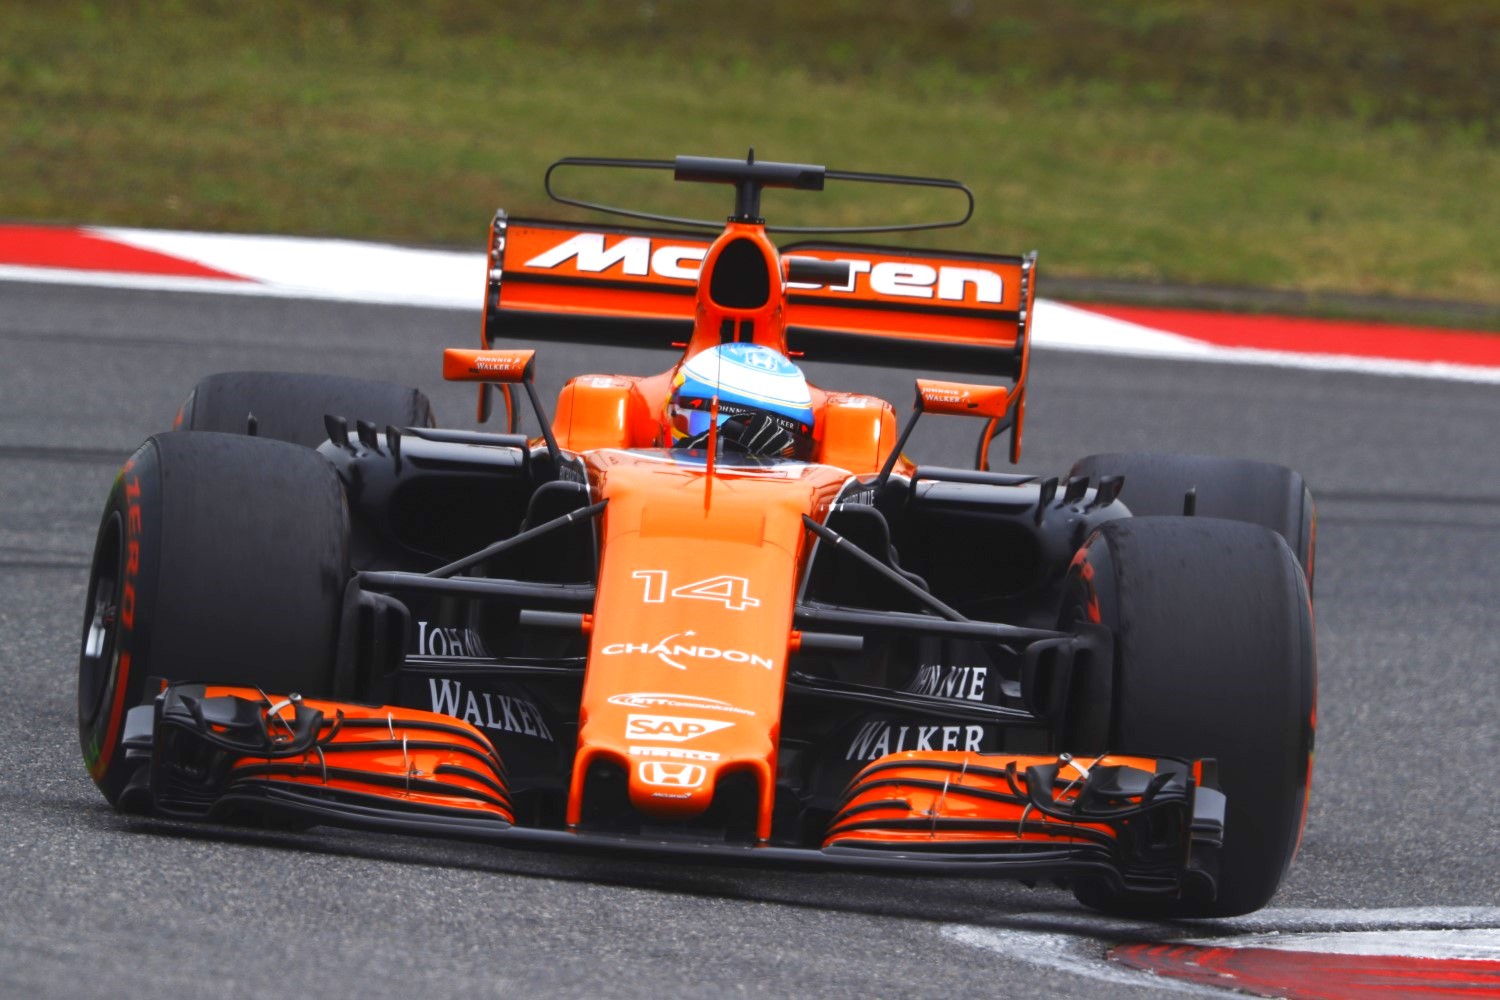 McLaren in trouble with no good engine